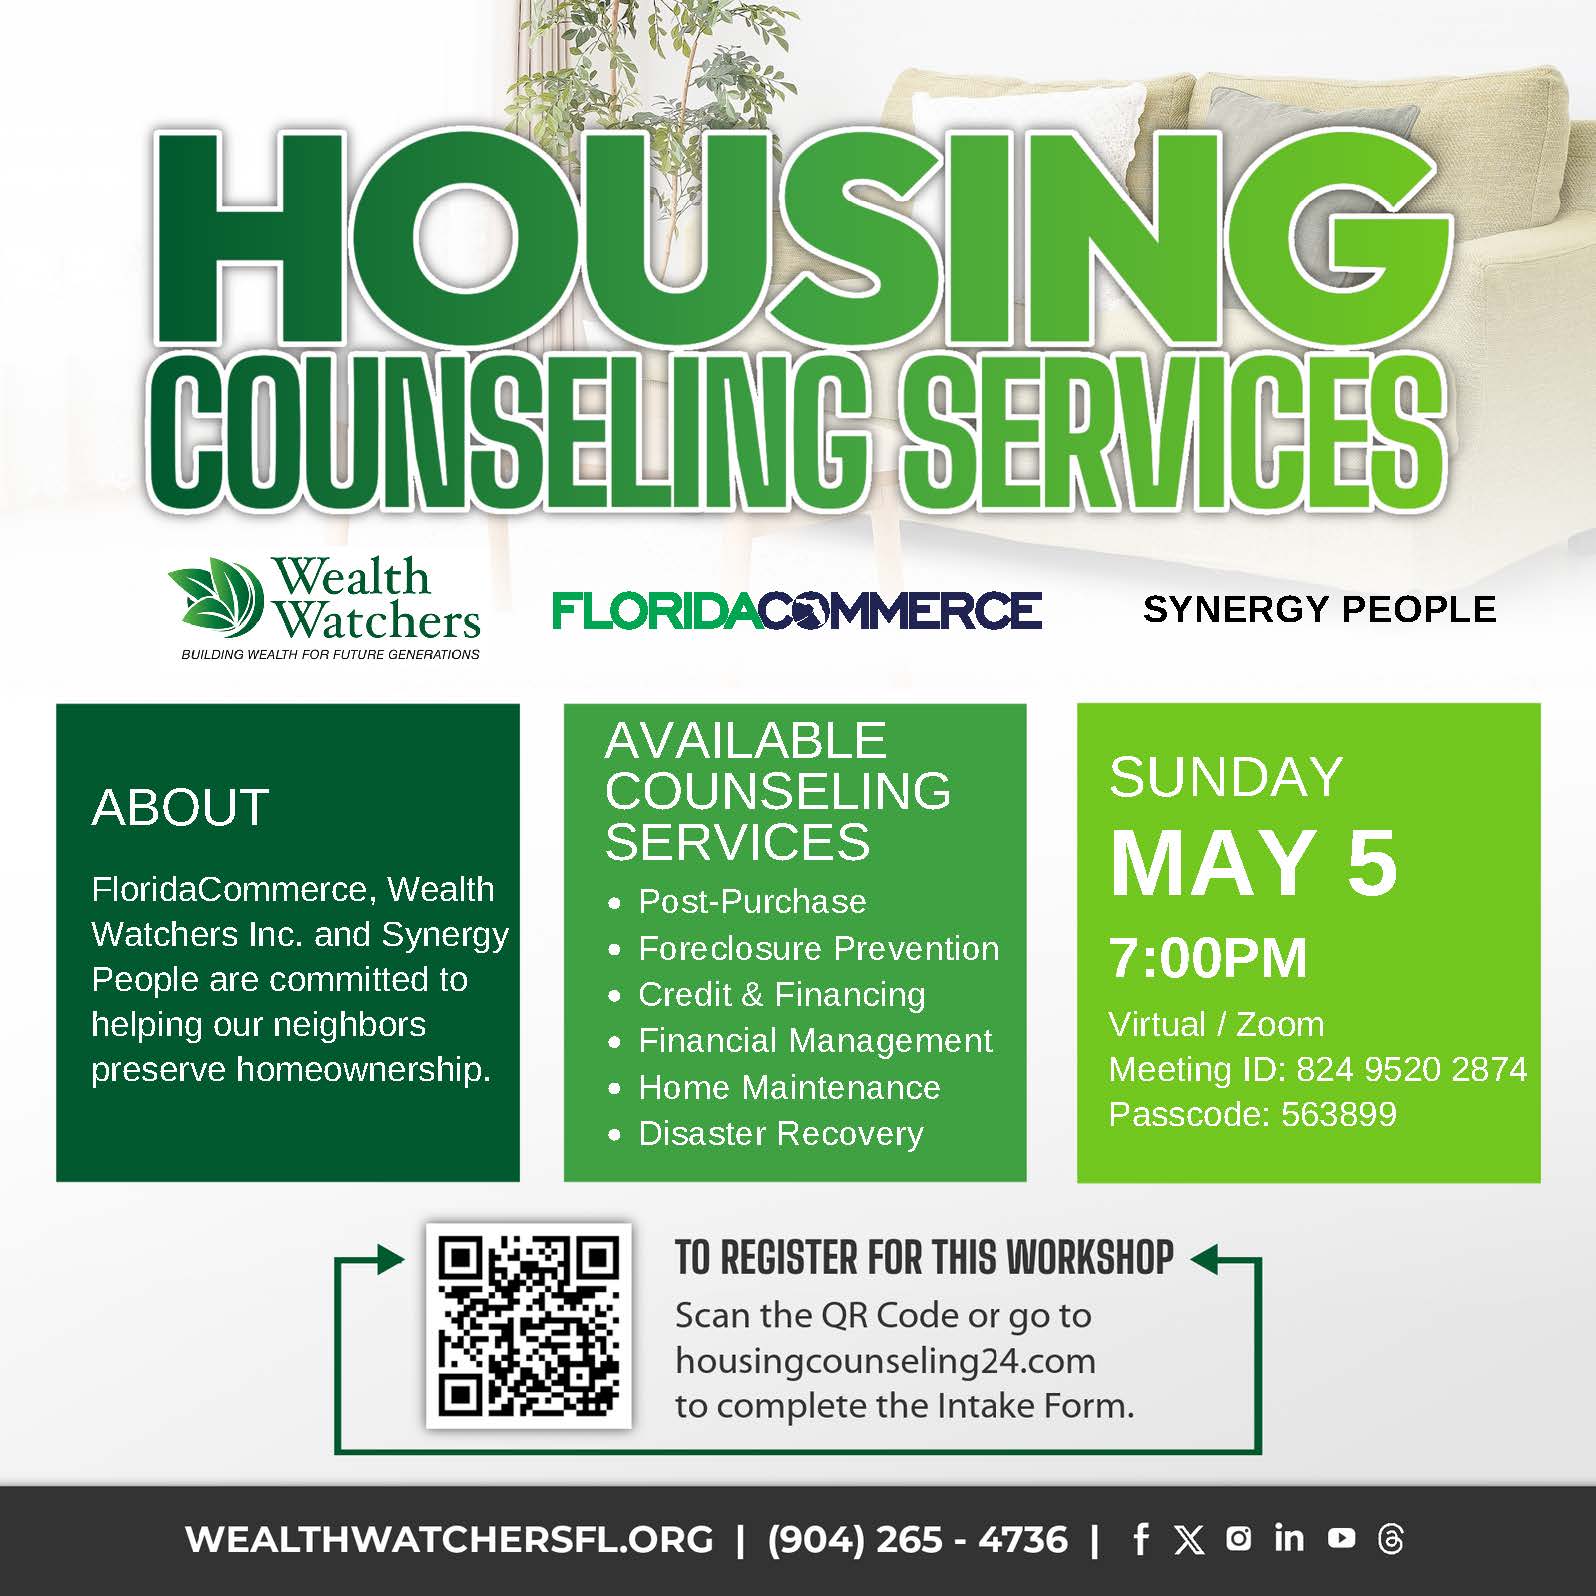 Housing Counseling Services Flyer